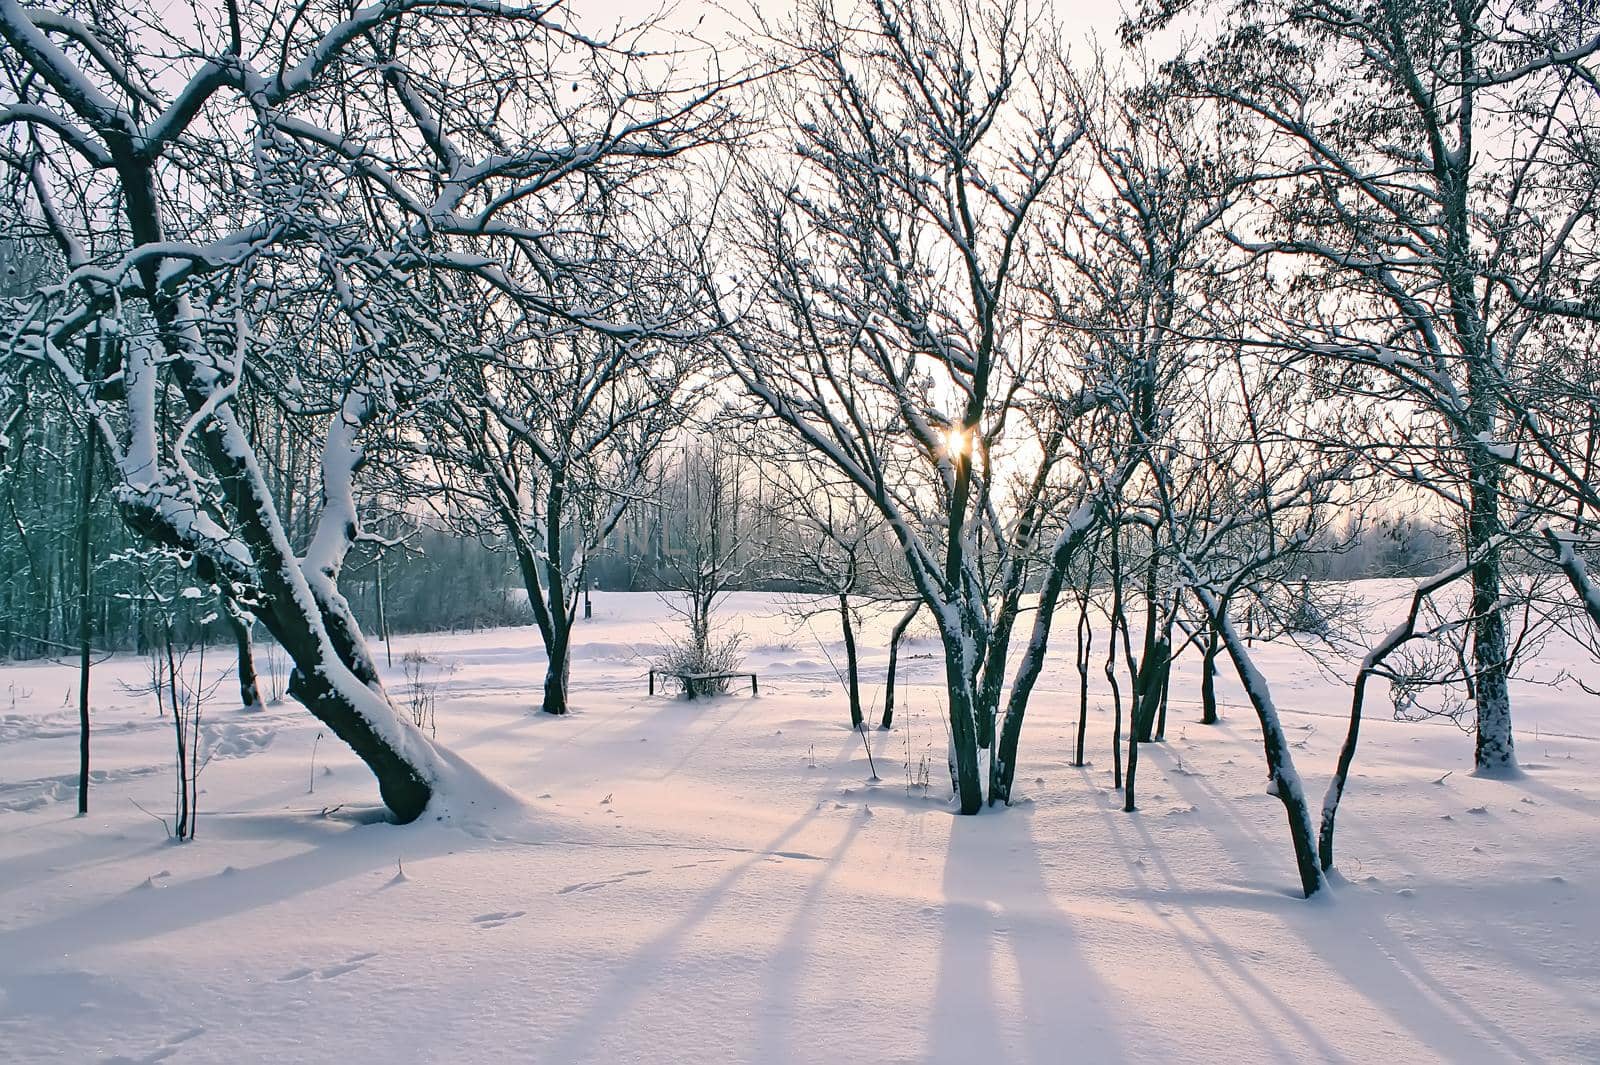 Snow-covered field and trees at winter in Latvia